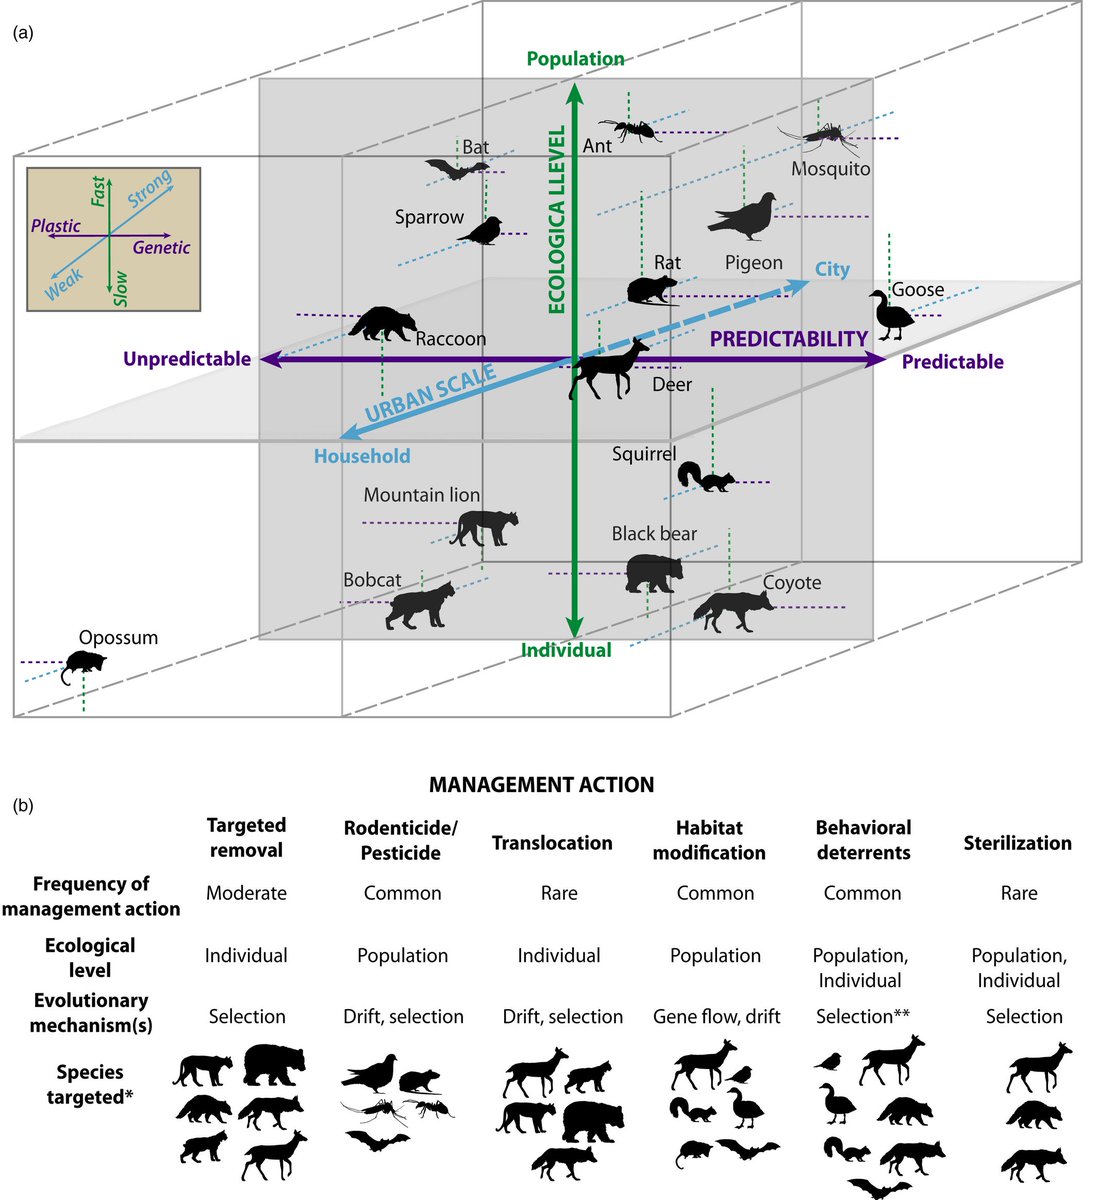 In a cross-disciplinary perspective about human–wildlife conflict, Schell et al  @cschell_canids ( https://doi.org/10.1111/eva.13131 ) dig into how socio-political policies and social processes interact with ecology in driving evolution in urban environments.13/14